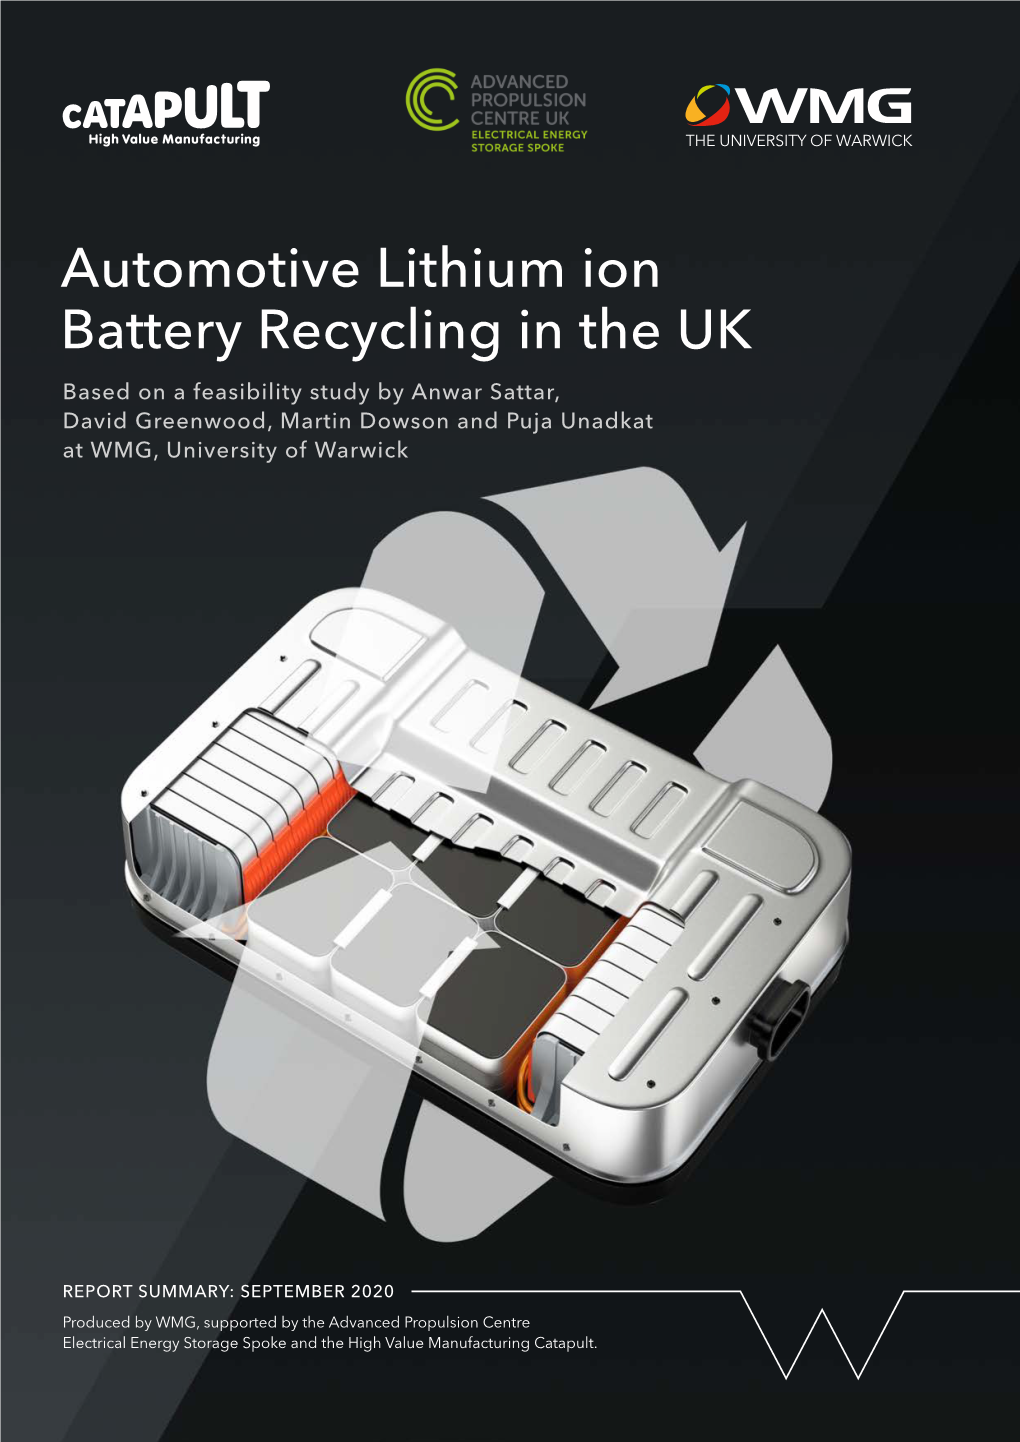 Automotive Lithium Ion Battery Recycling in the UK